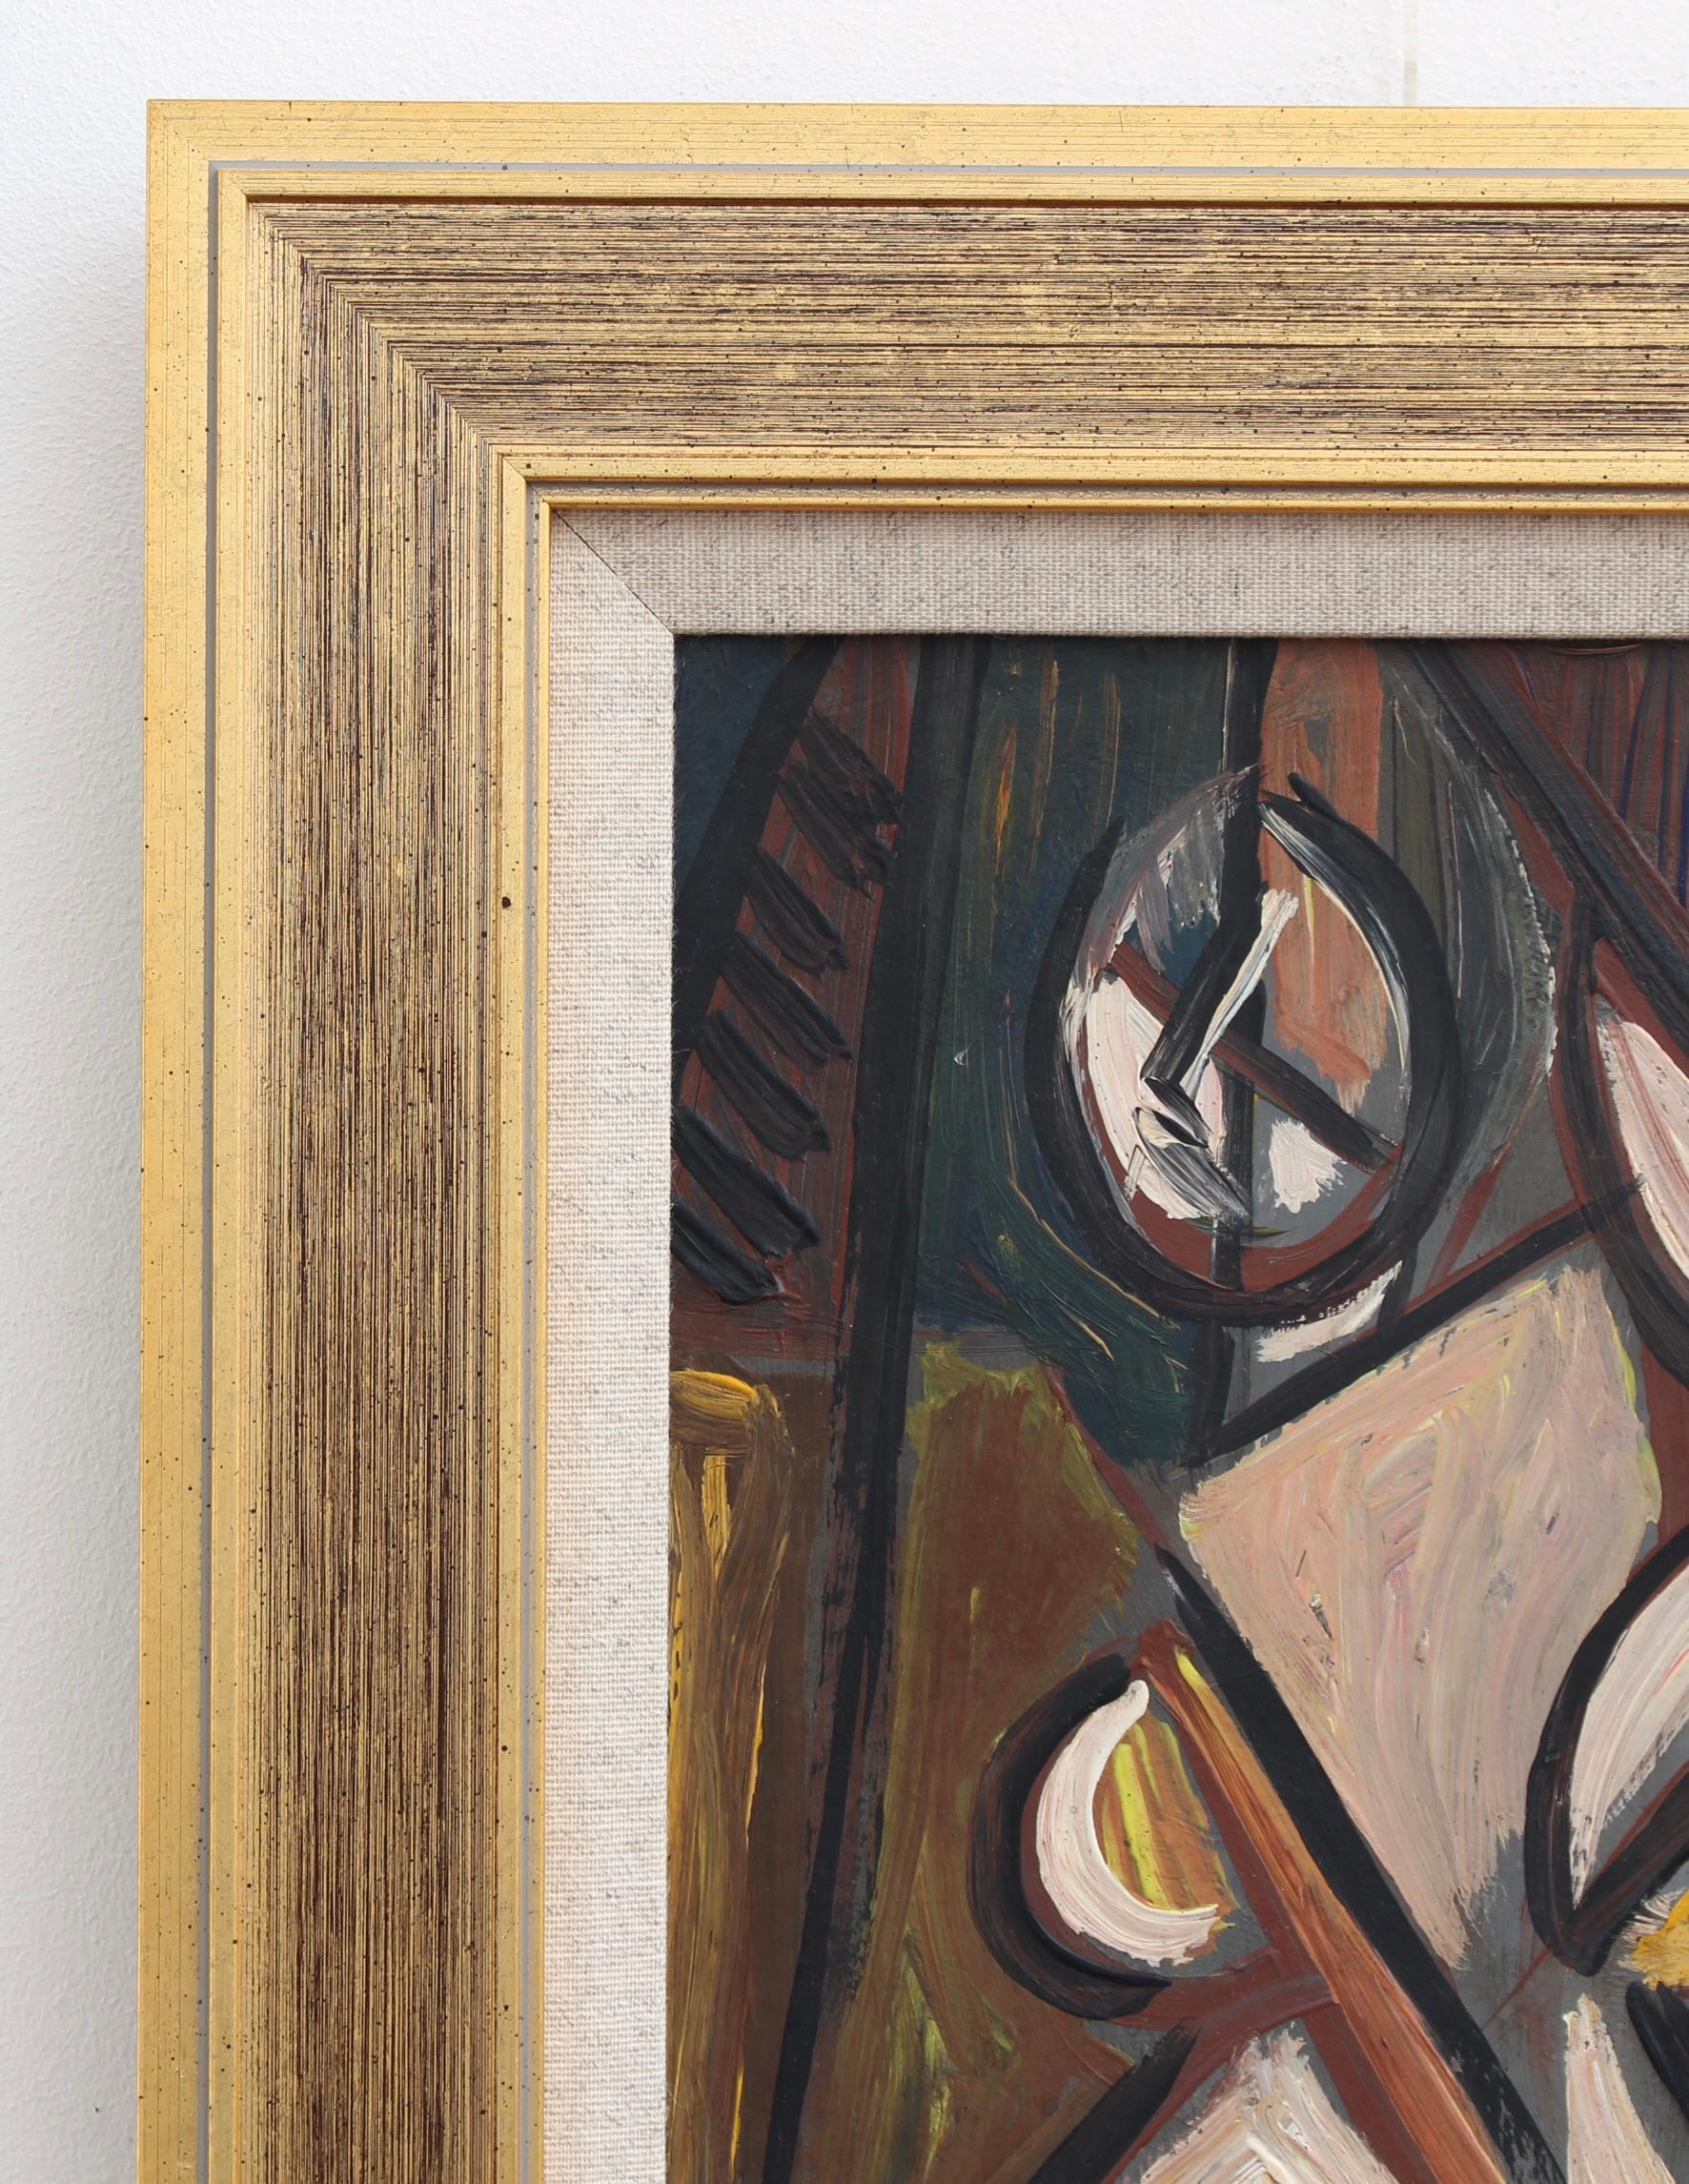 'Radiant Muse: Inspired Cubist Portrait', oil on board, the German School (circa 1970s). A very alluring painting with warm earth tone hues both vibrant and muted. Clearly inspired by cubists Picasso and Braque, the artist uses angles, lines and